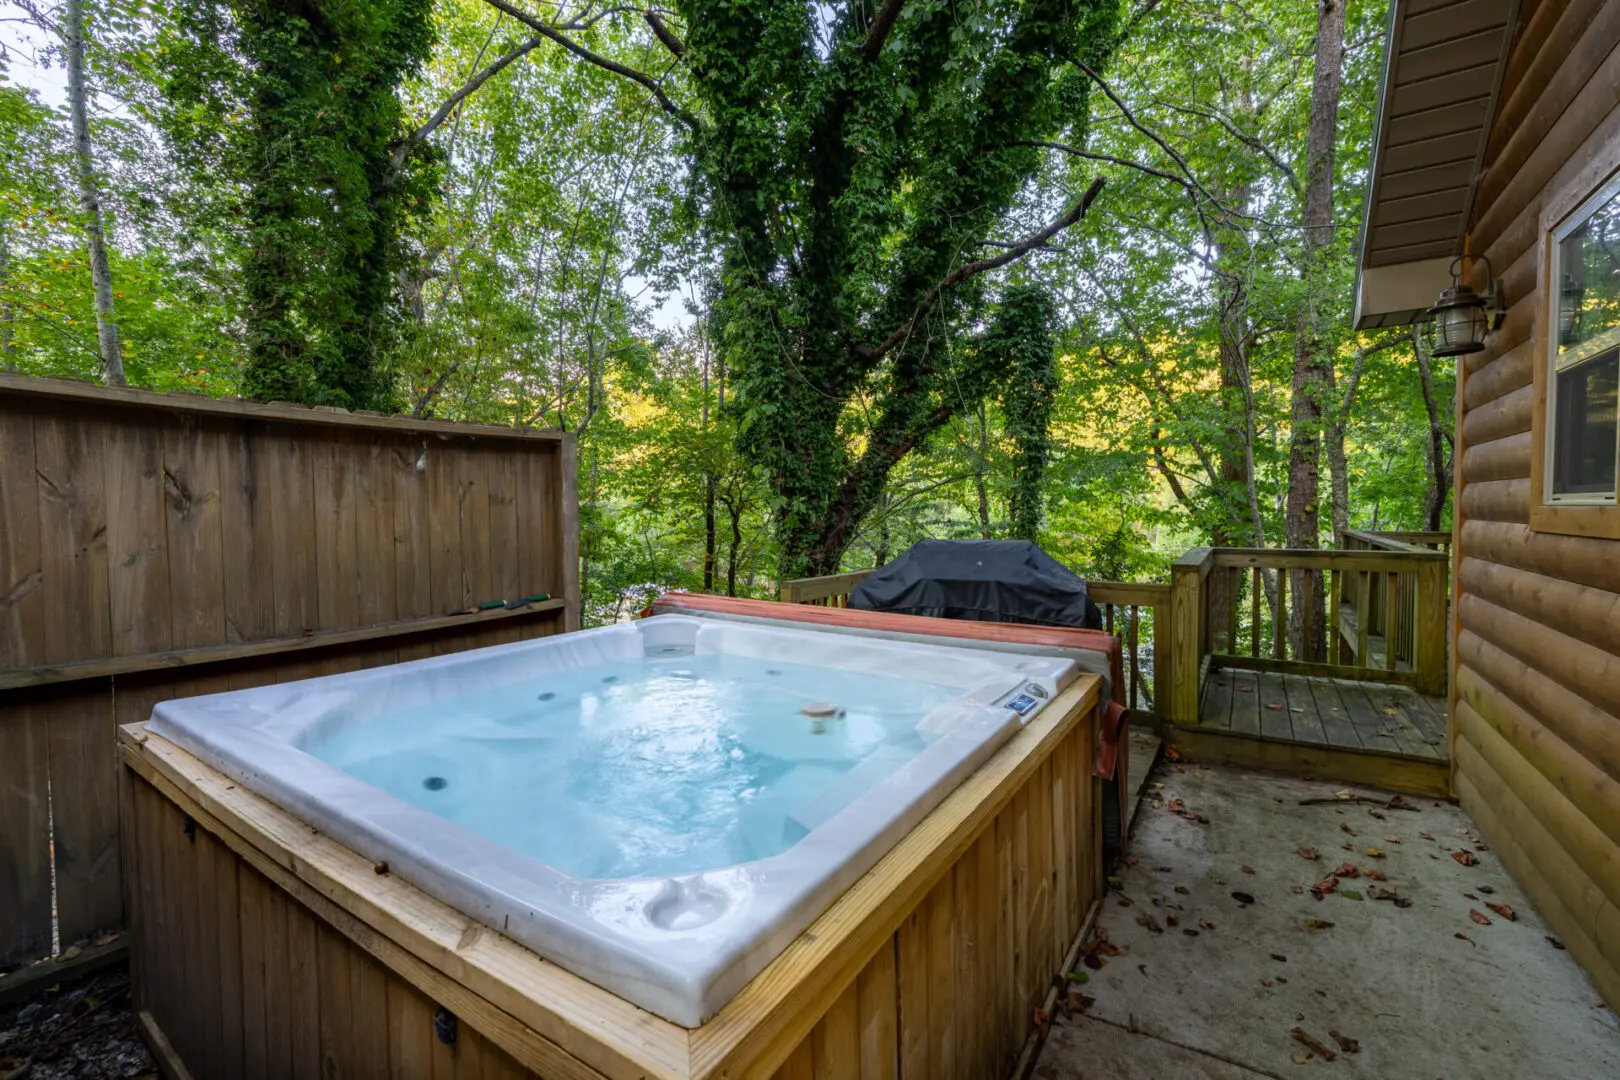 A hot tub on the deck of a cabin in pigeon forge, tennessee.